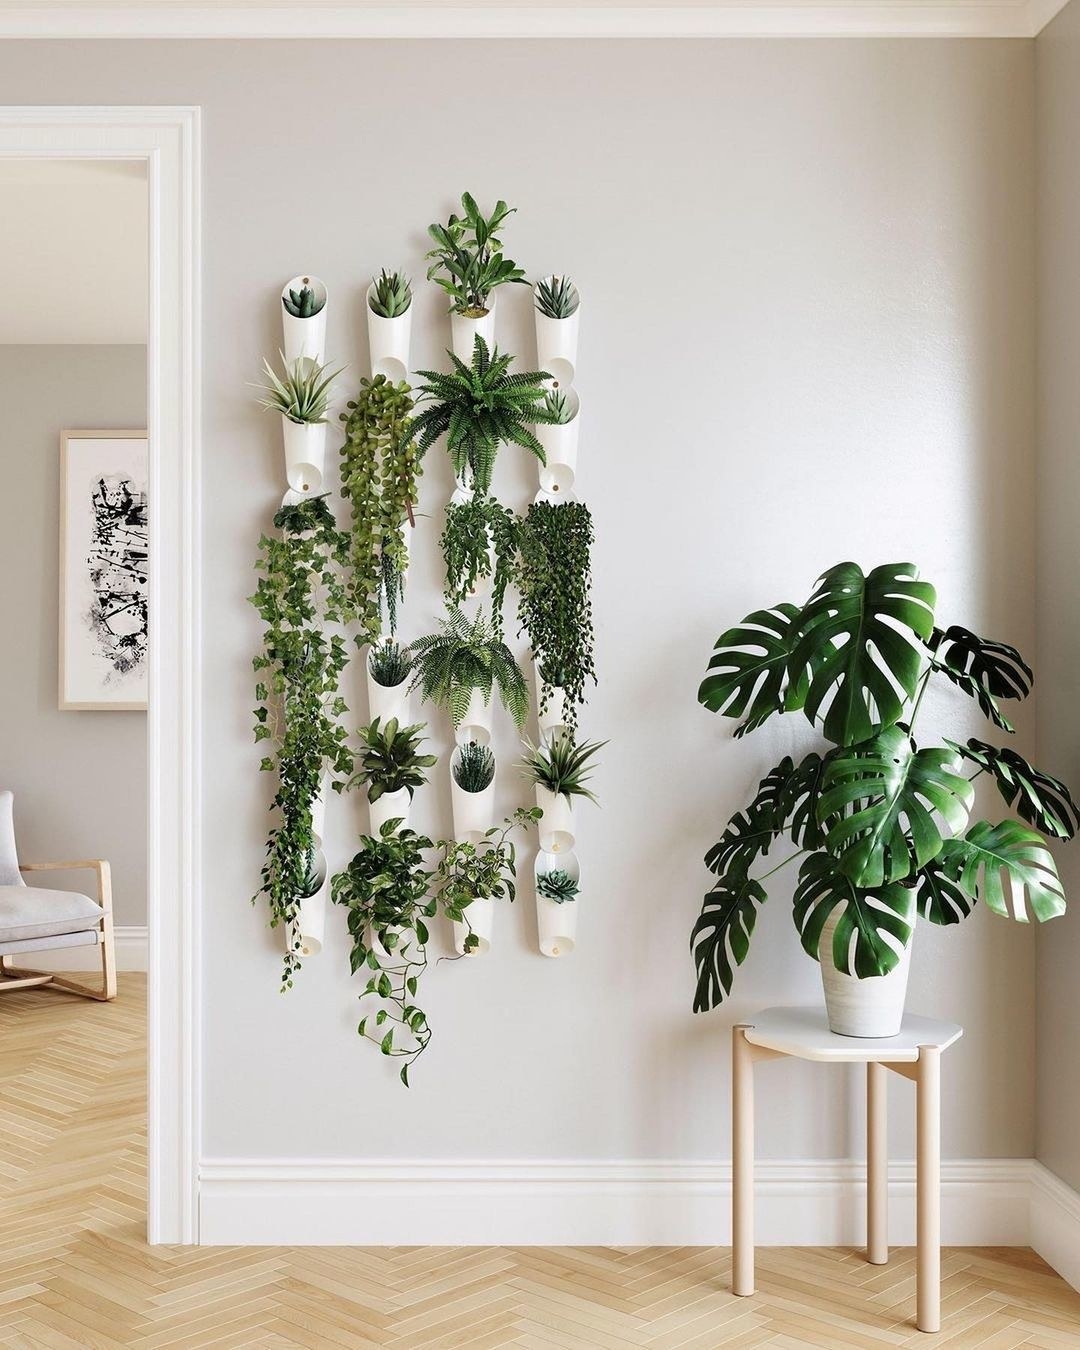 the wall mounted organizers on the wall used as a diy living wall